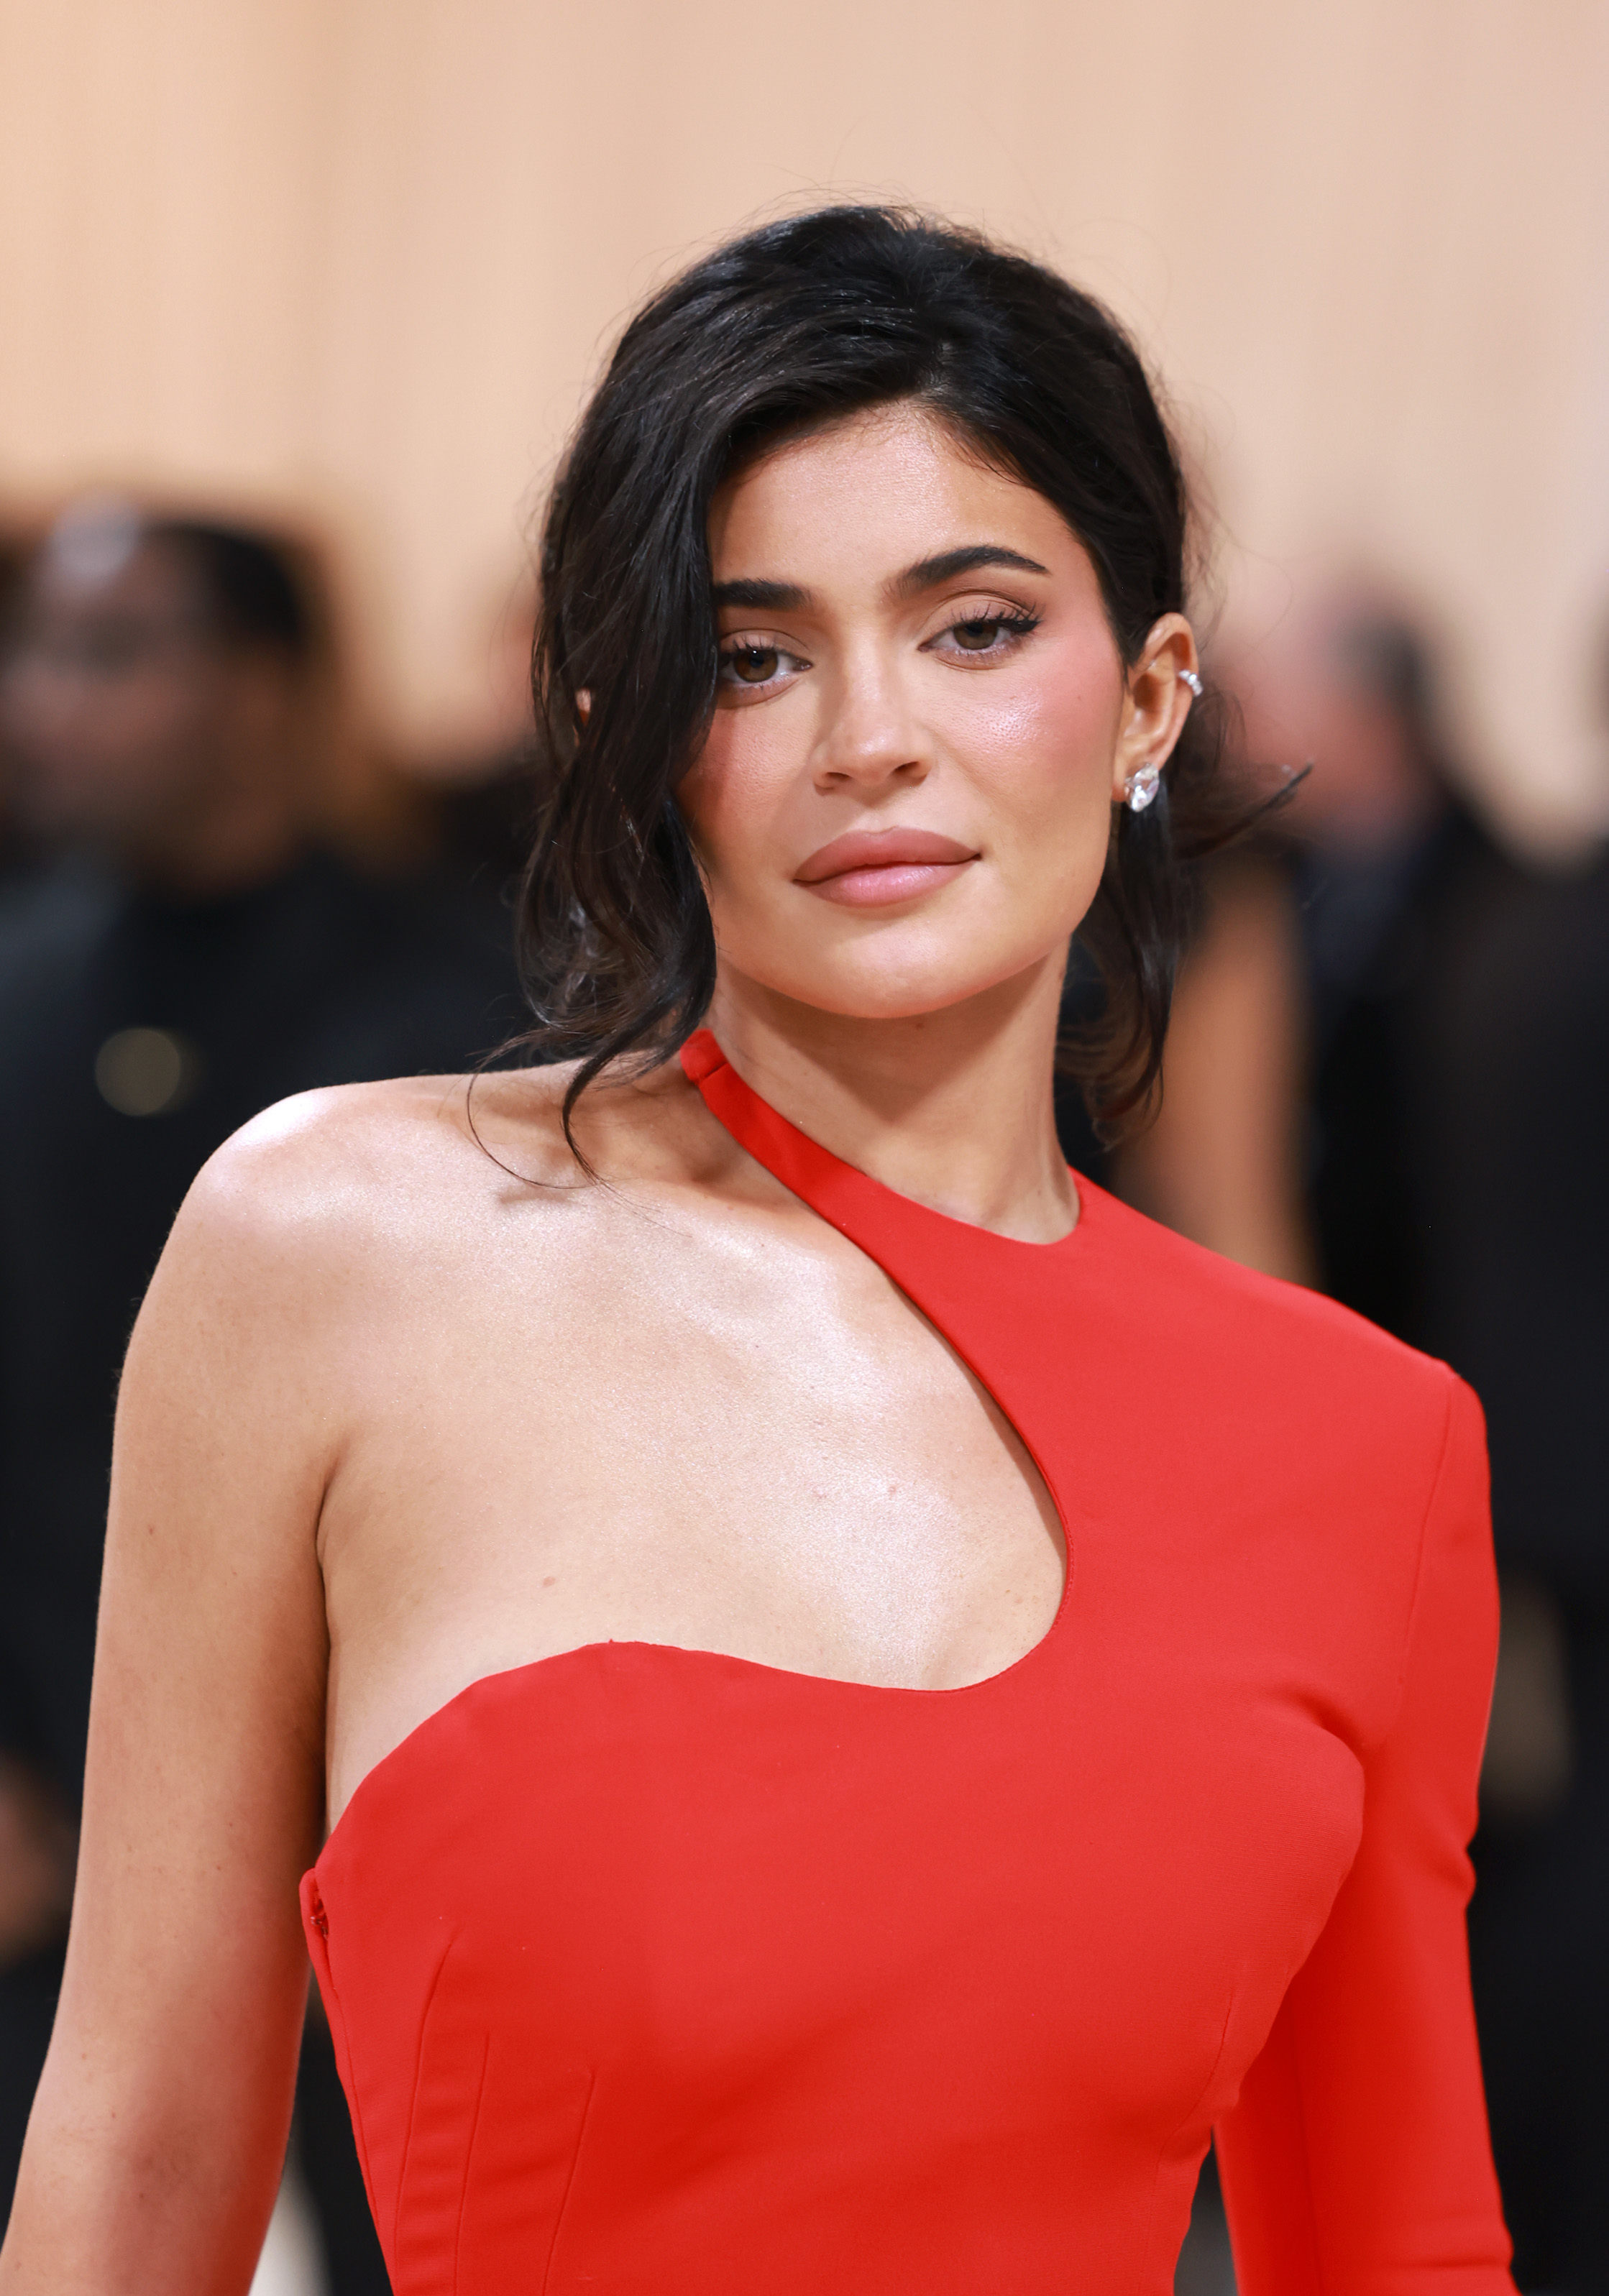 Kylie And Kendall Jenner Were Verbally Abused By Paparazzi As Teens